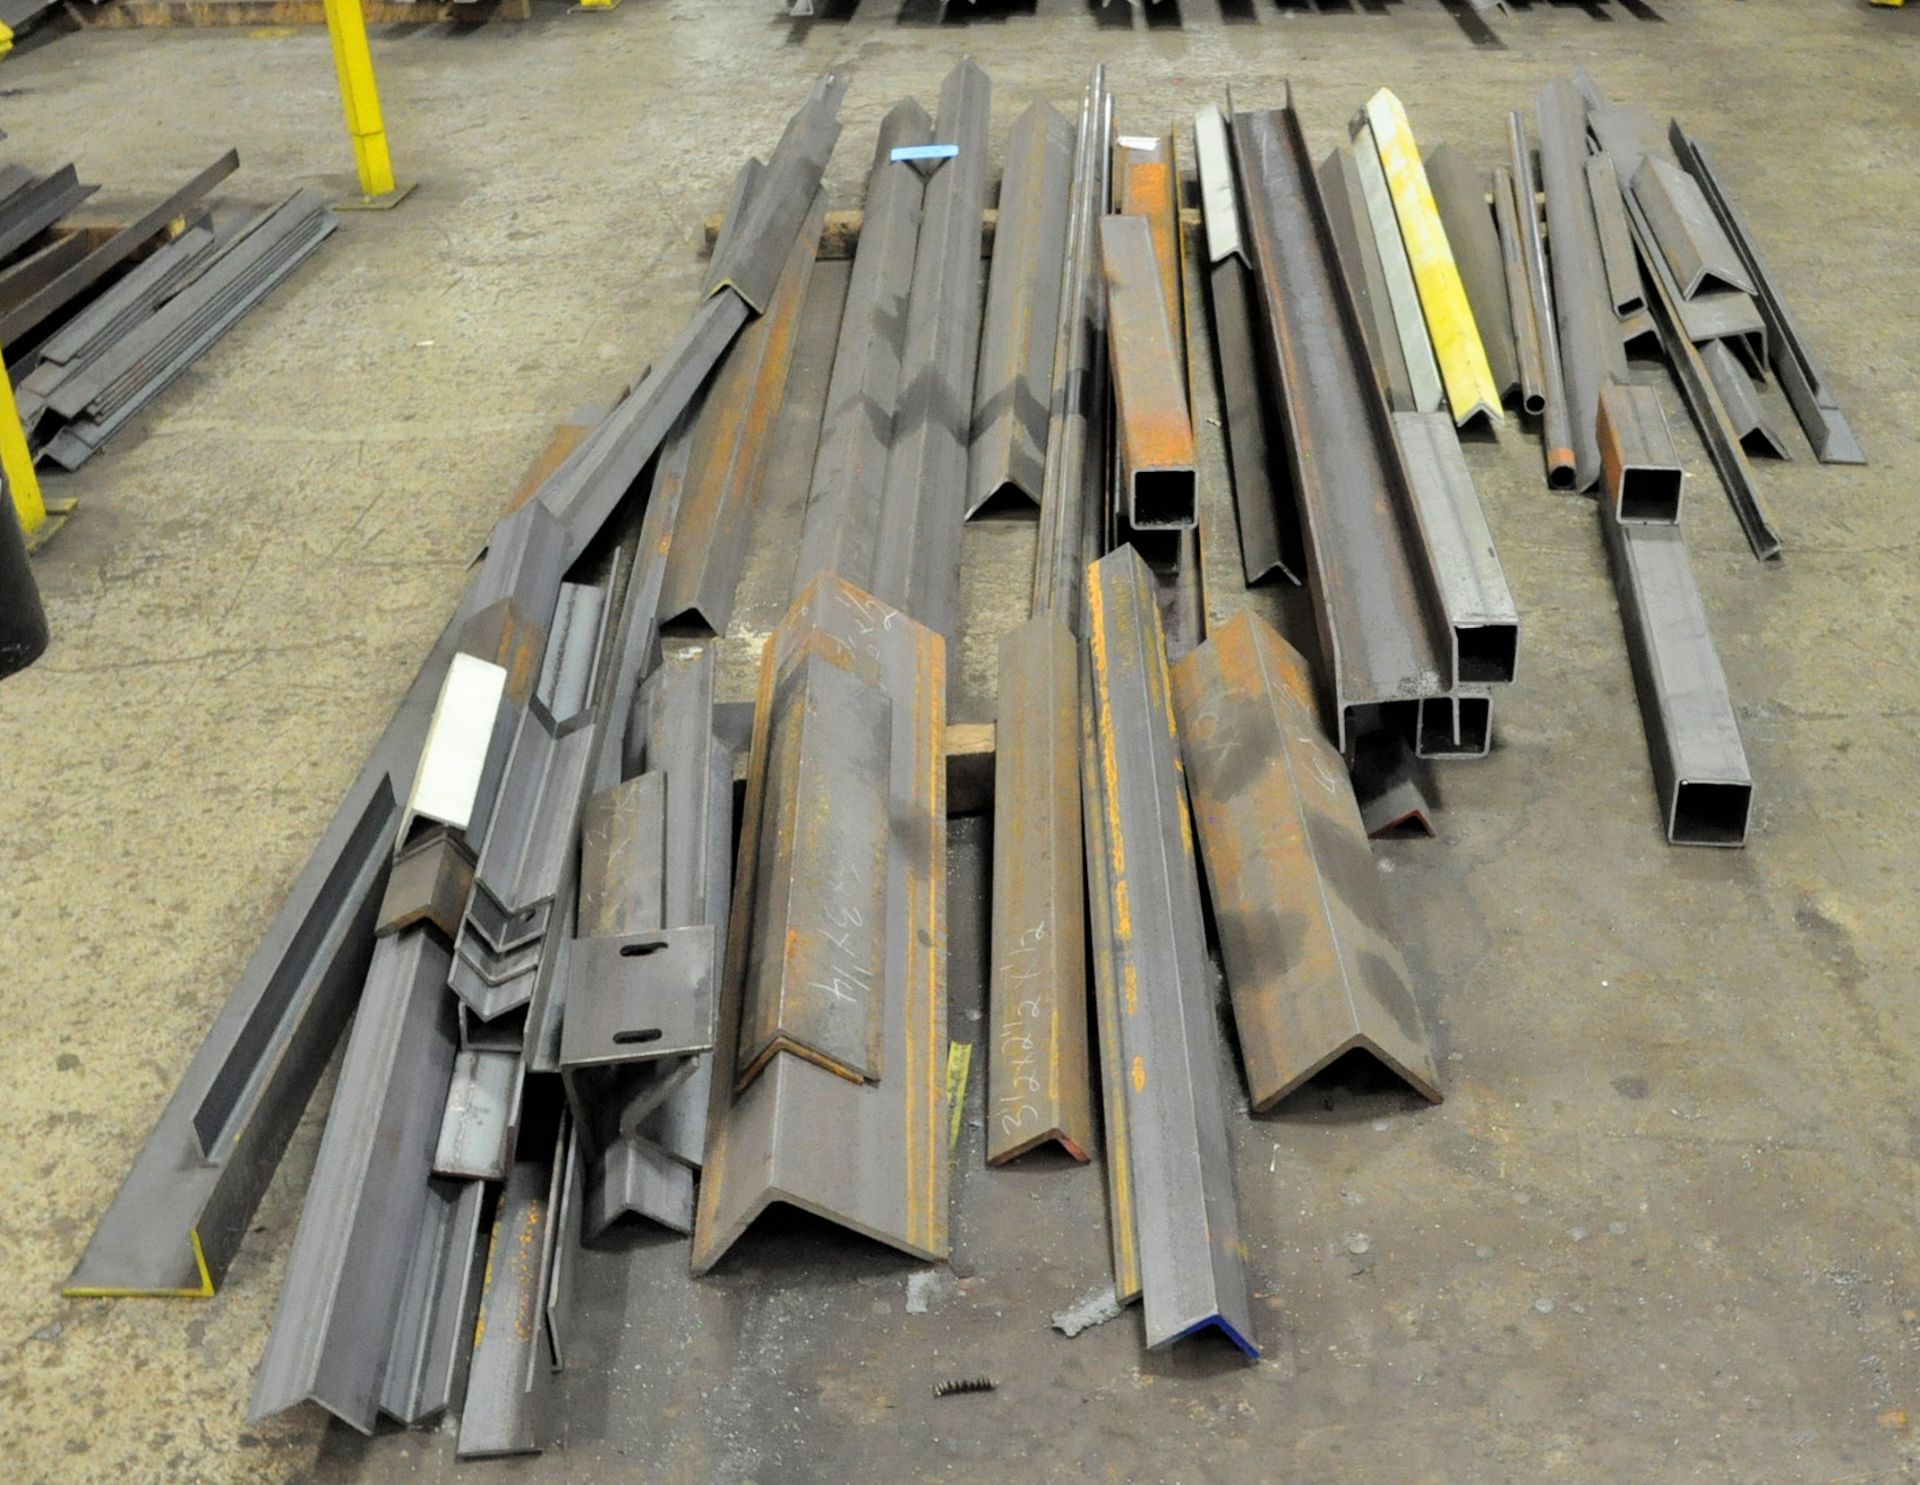 Lot-Steel Angle Iron, I-Beam, Hollow Square and Round Tube Stock, Various Widths and Lengths - Image 2 of 2